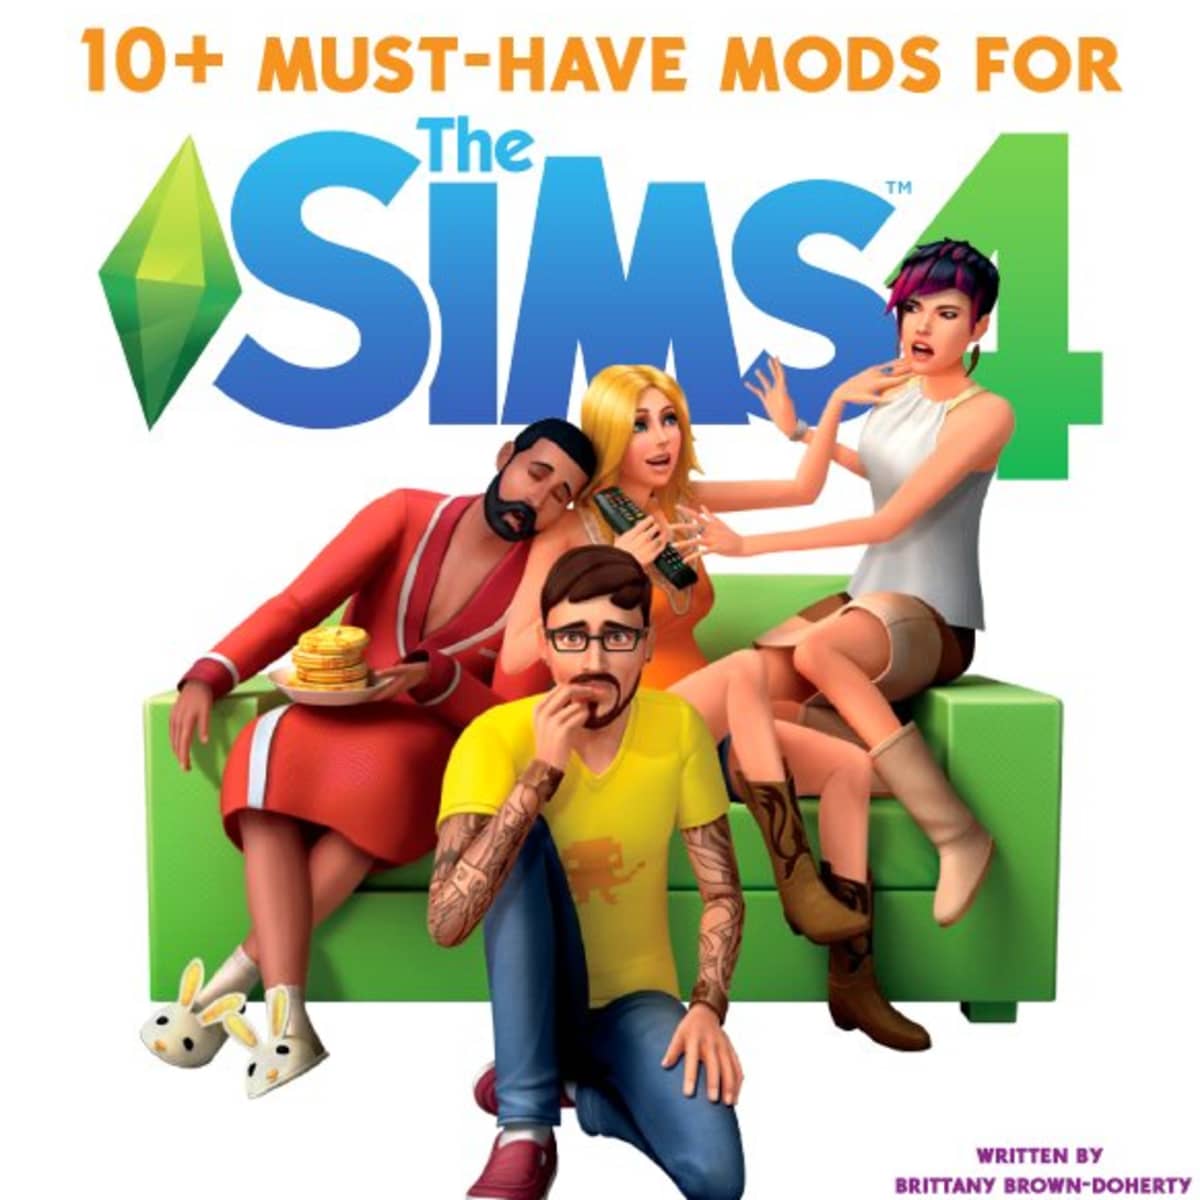 Sims sex mod in Damascus